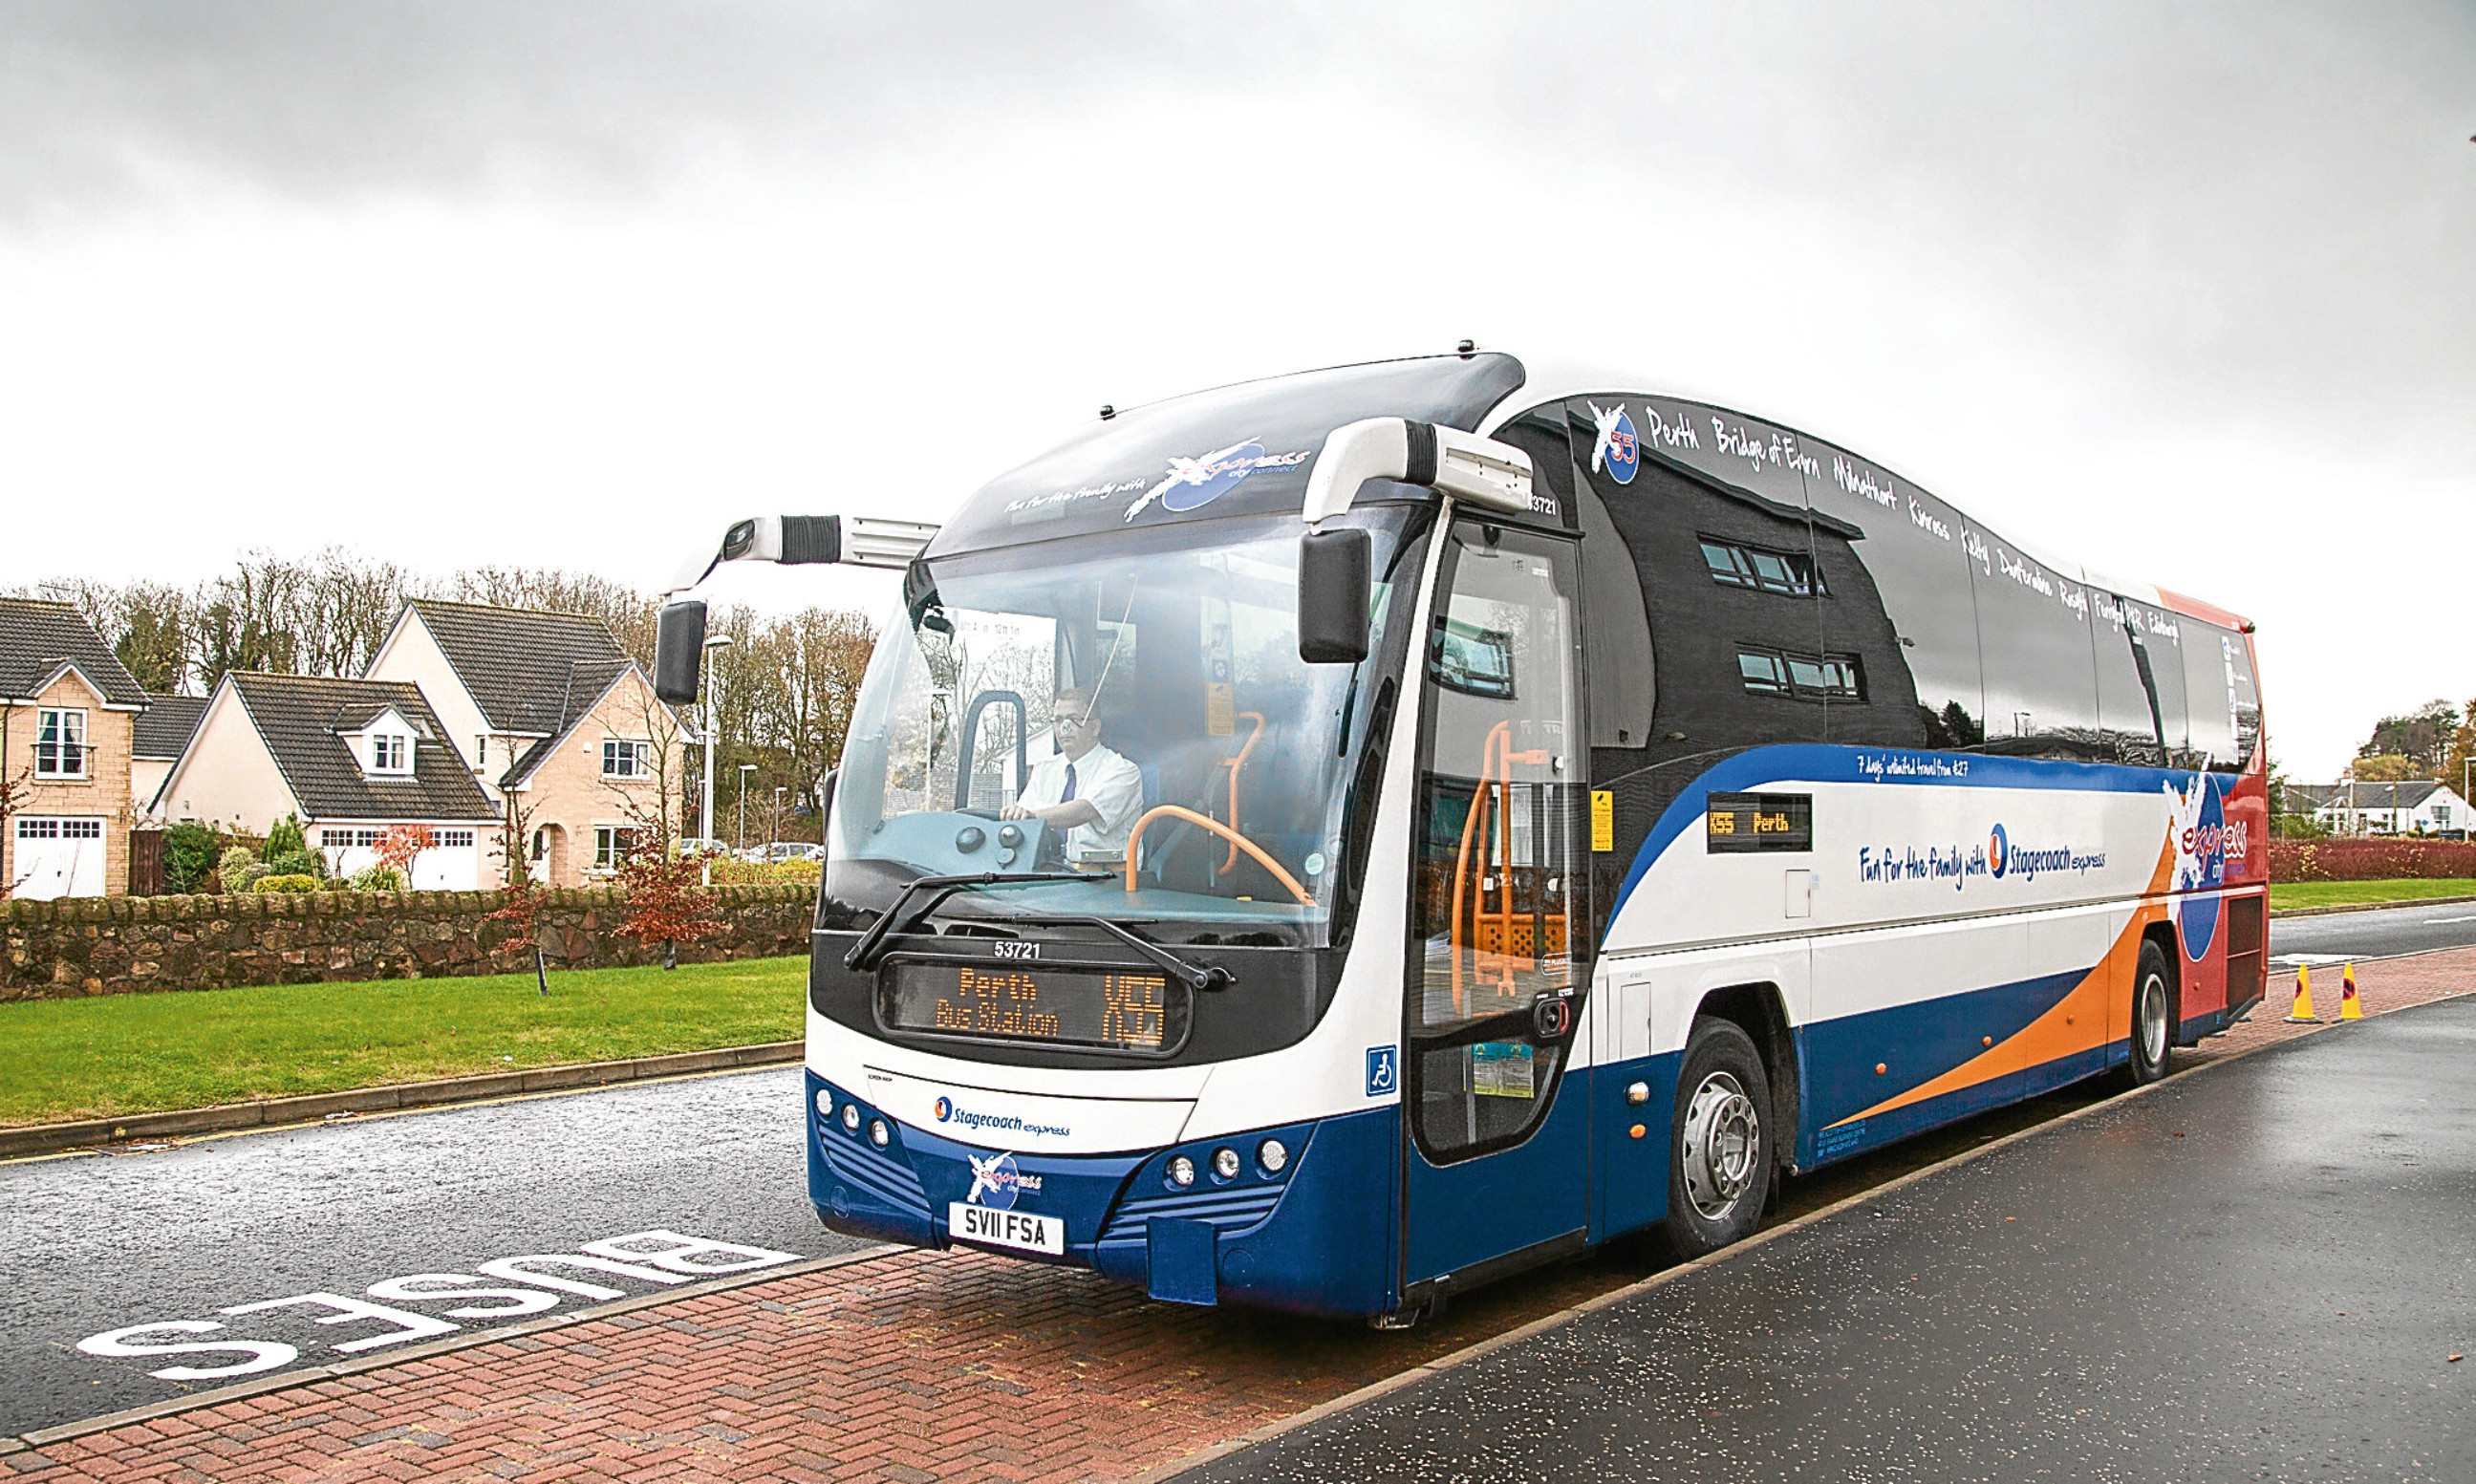 Will these Stagecoach buses soon be a thing of the past?